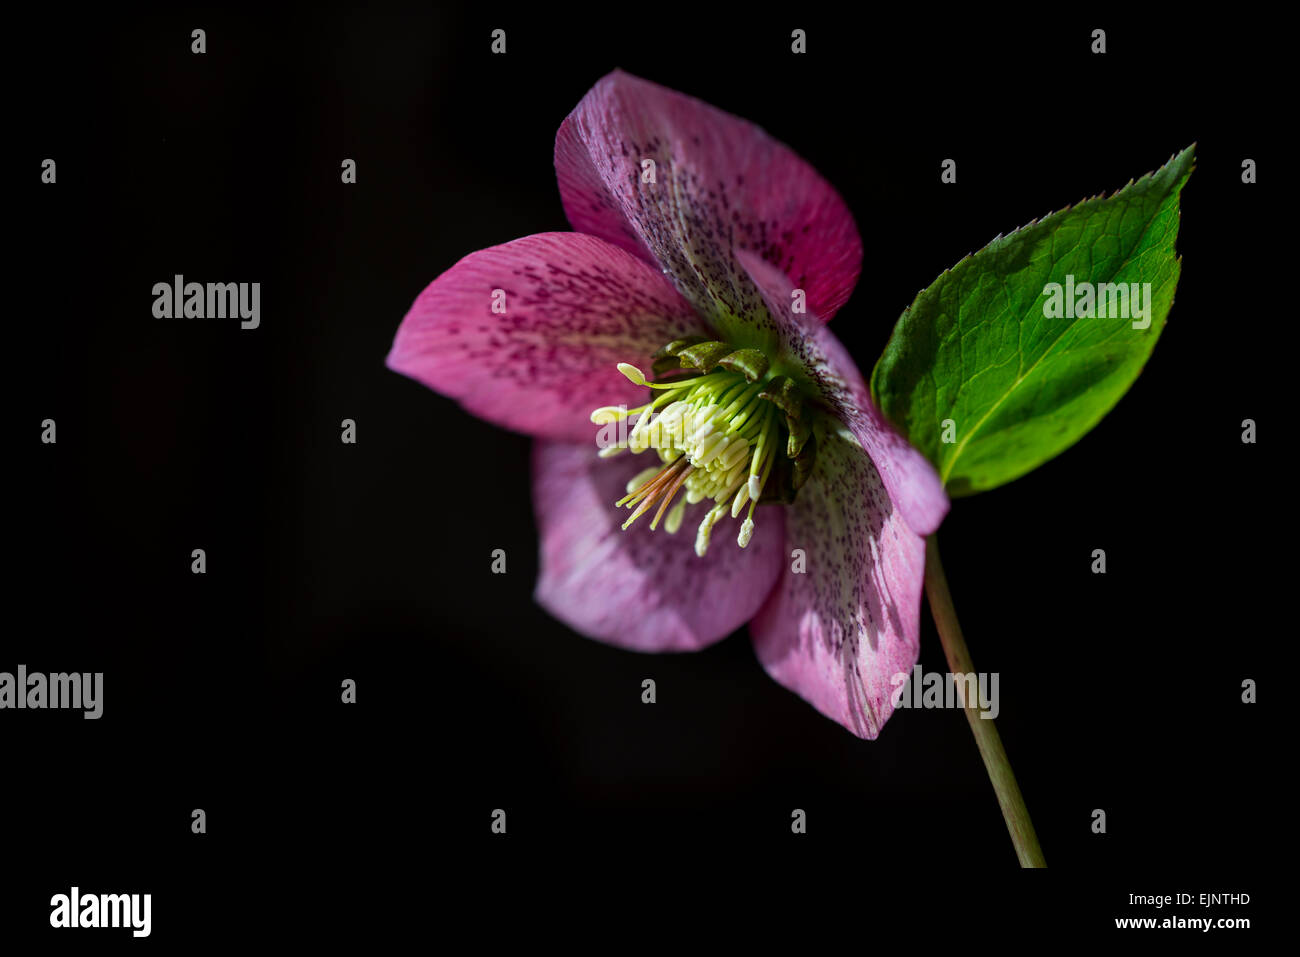 Deep pink/red Helleborus Orientalis with spotted petals. Natural light and a dark background. Stock Photo